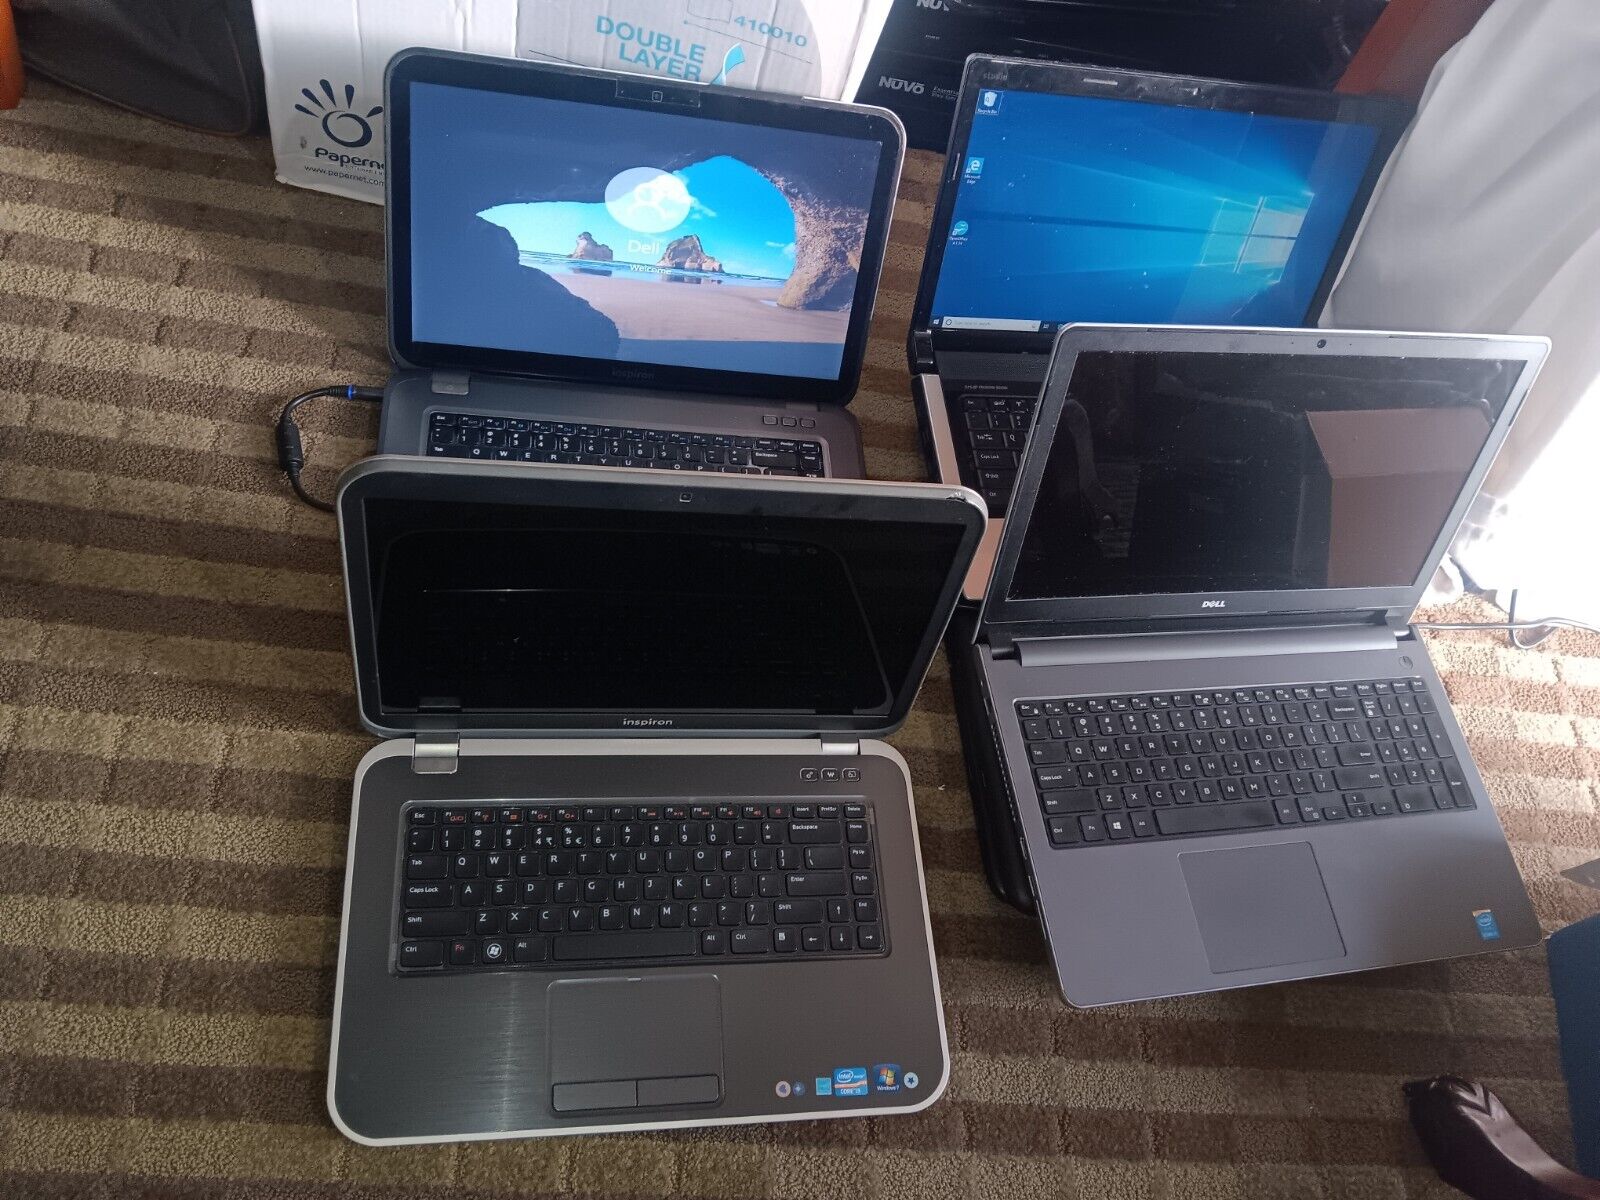 20 Lot HP,Dell,Toshiba, Acer,Macbook Windows 10,Sold As Is Defective Read Please